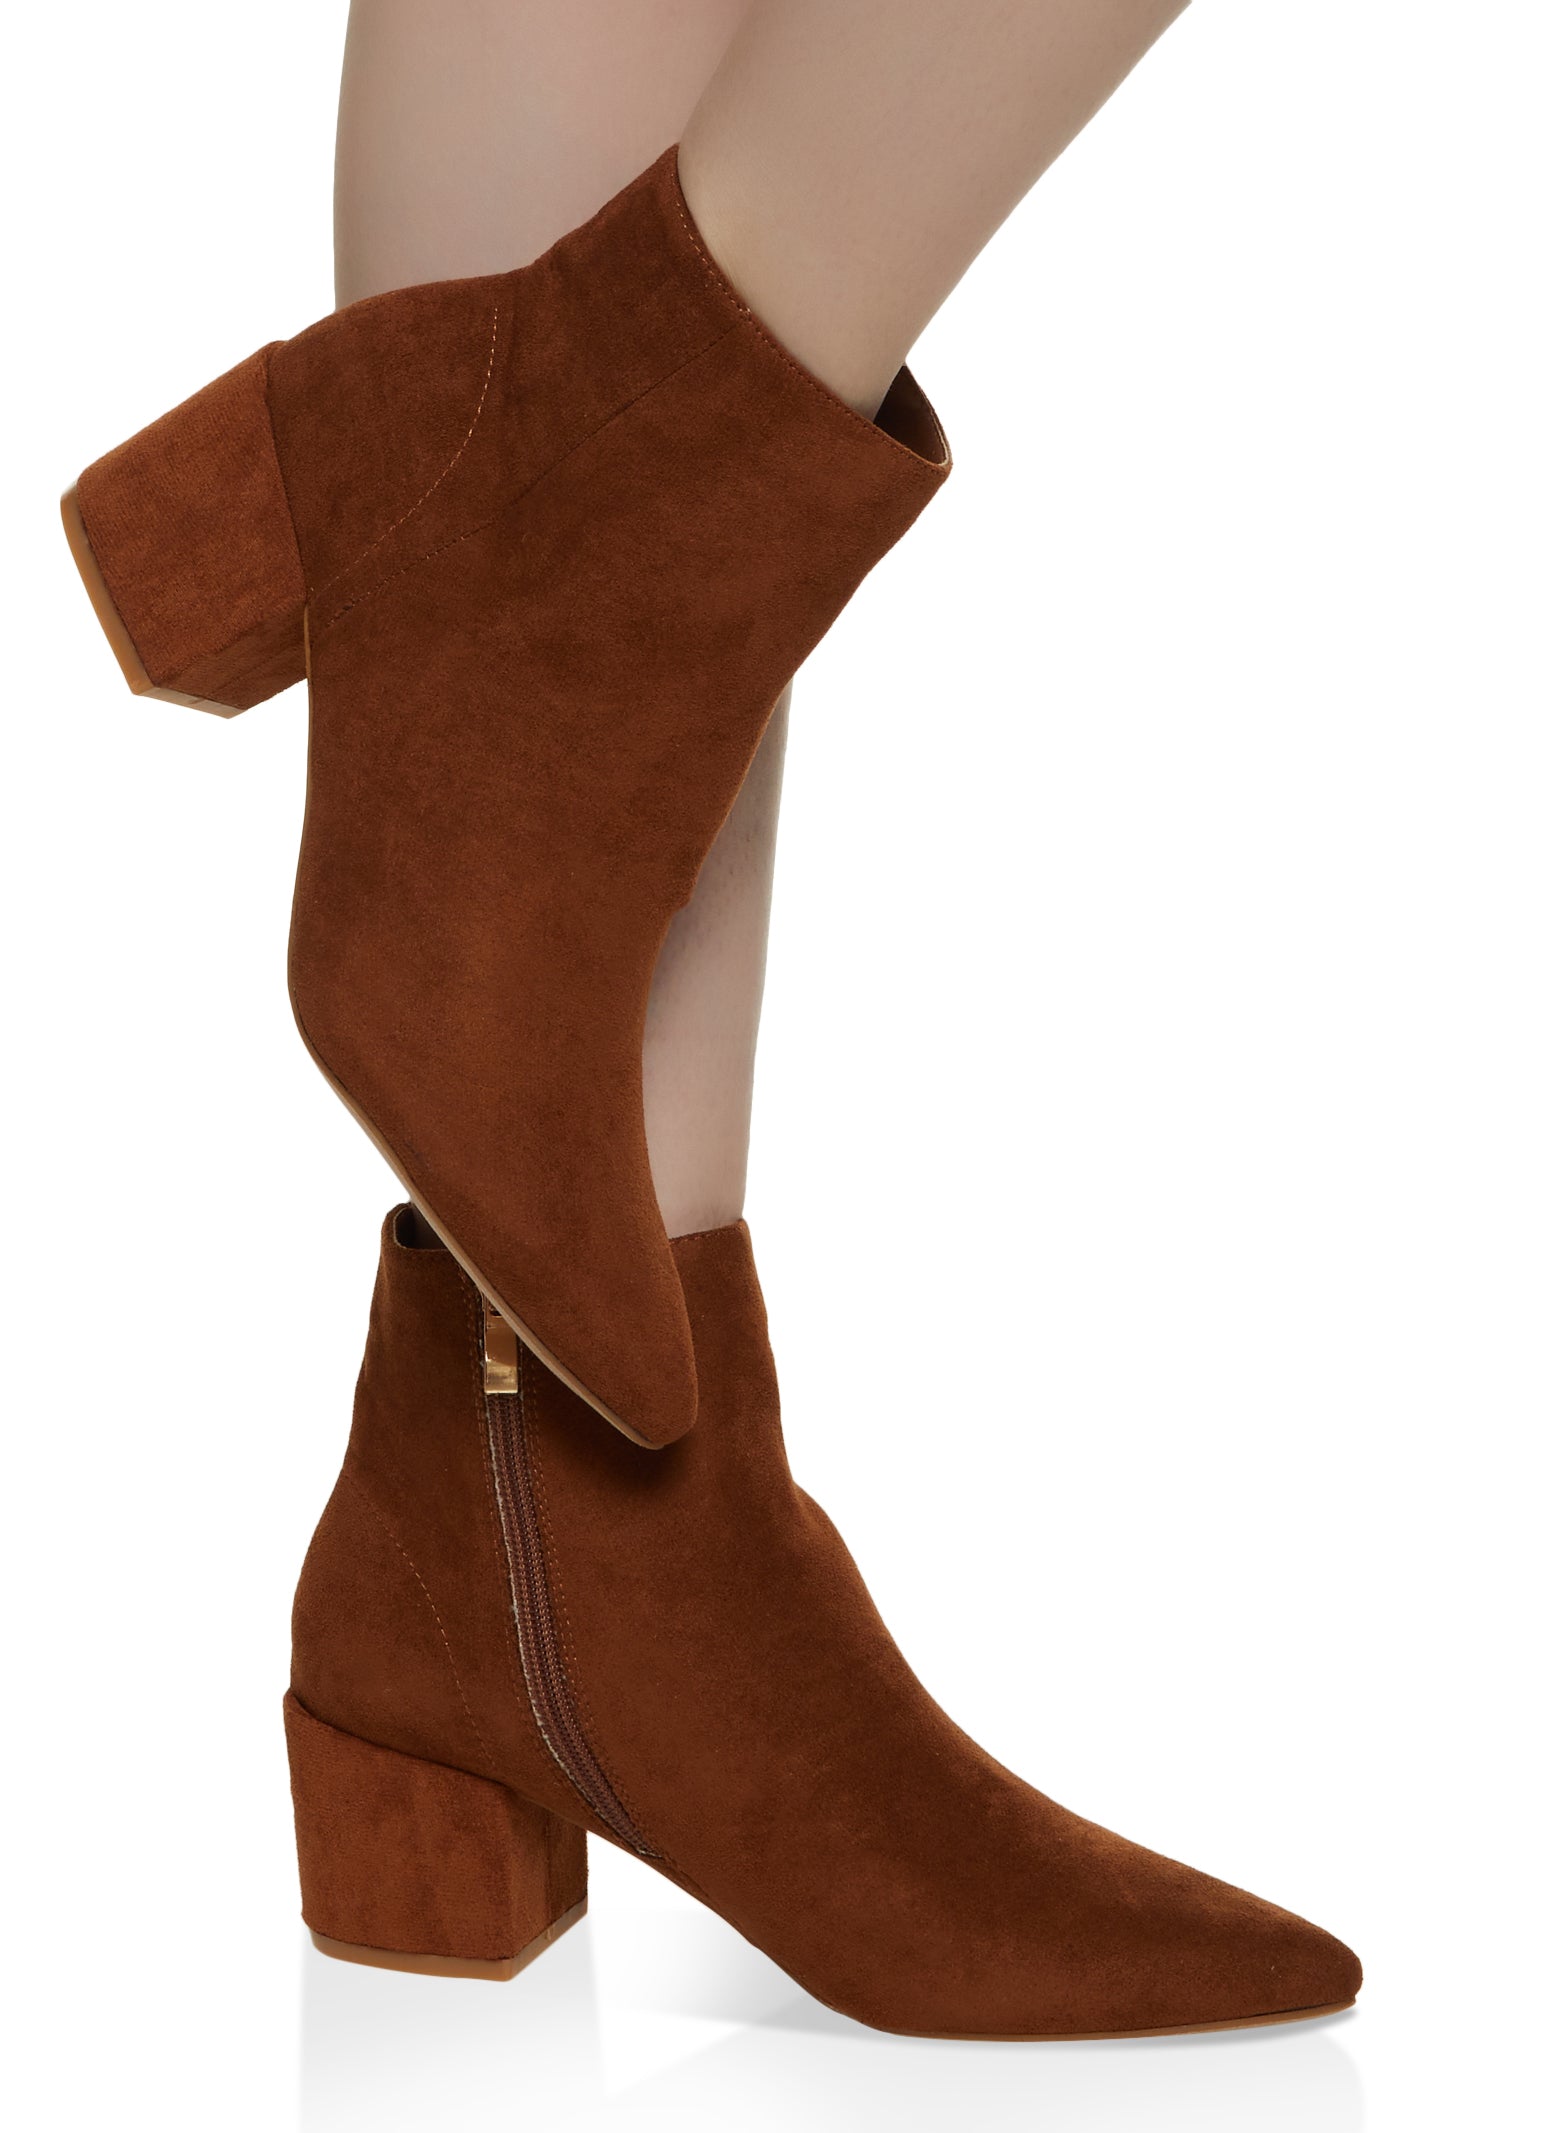 Buy Tan Boots for Women by Outryt Online | Ajio.com